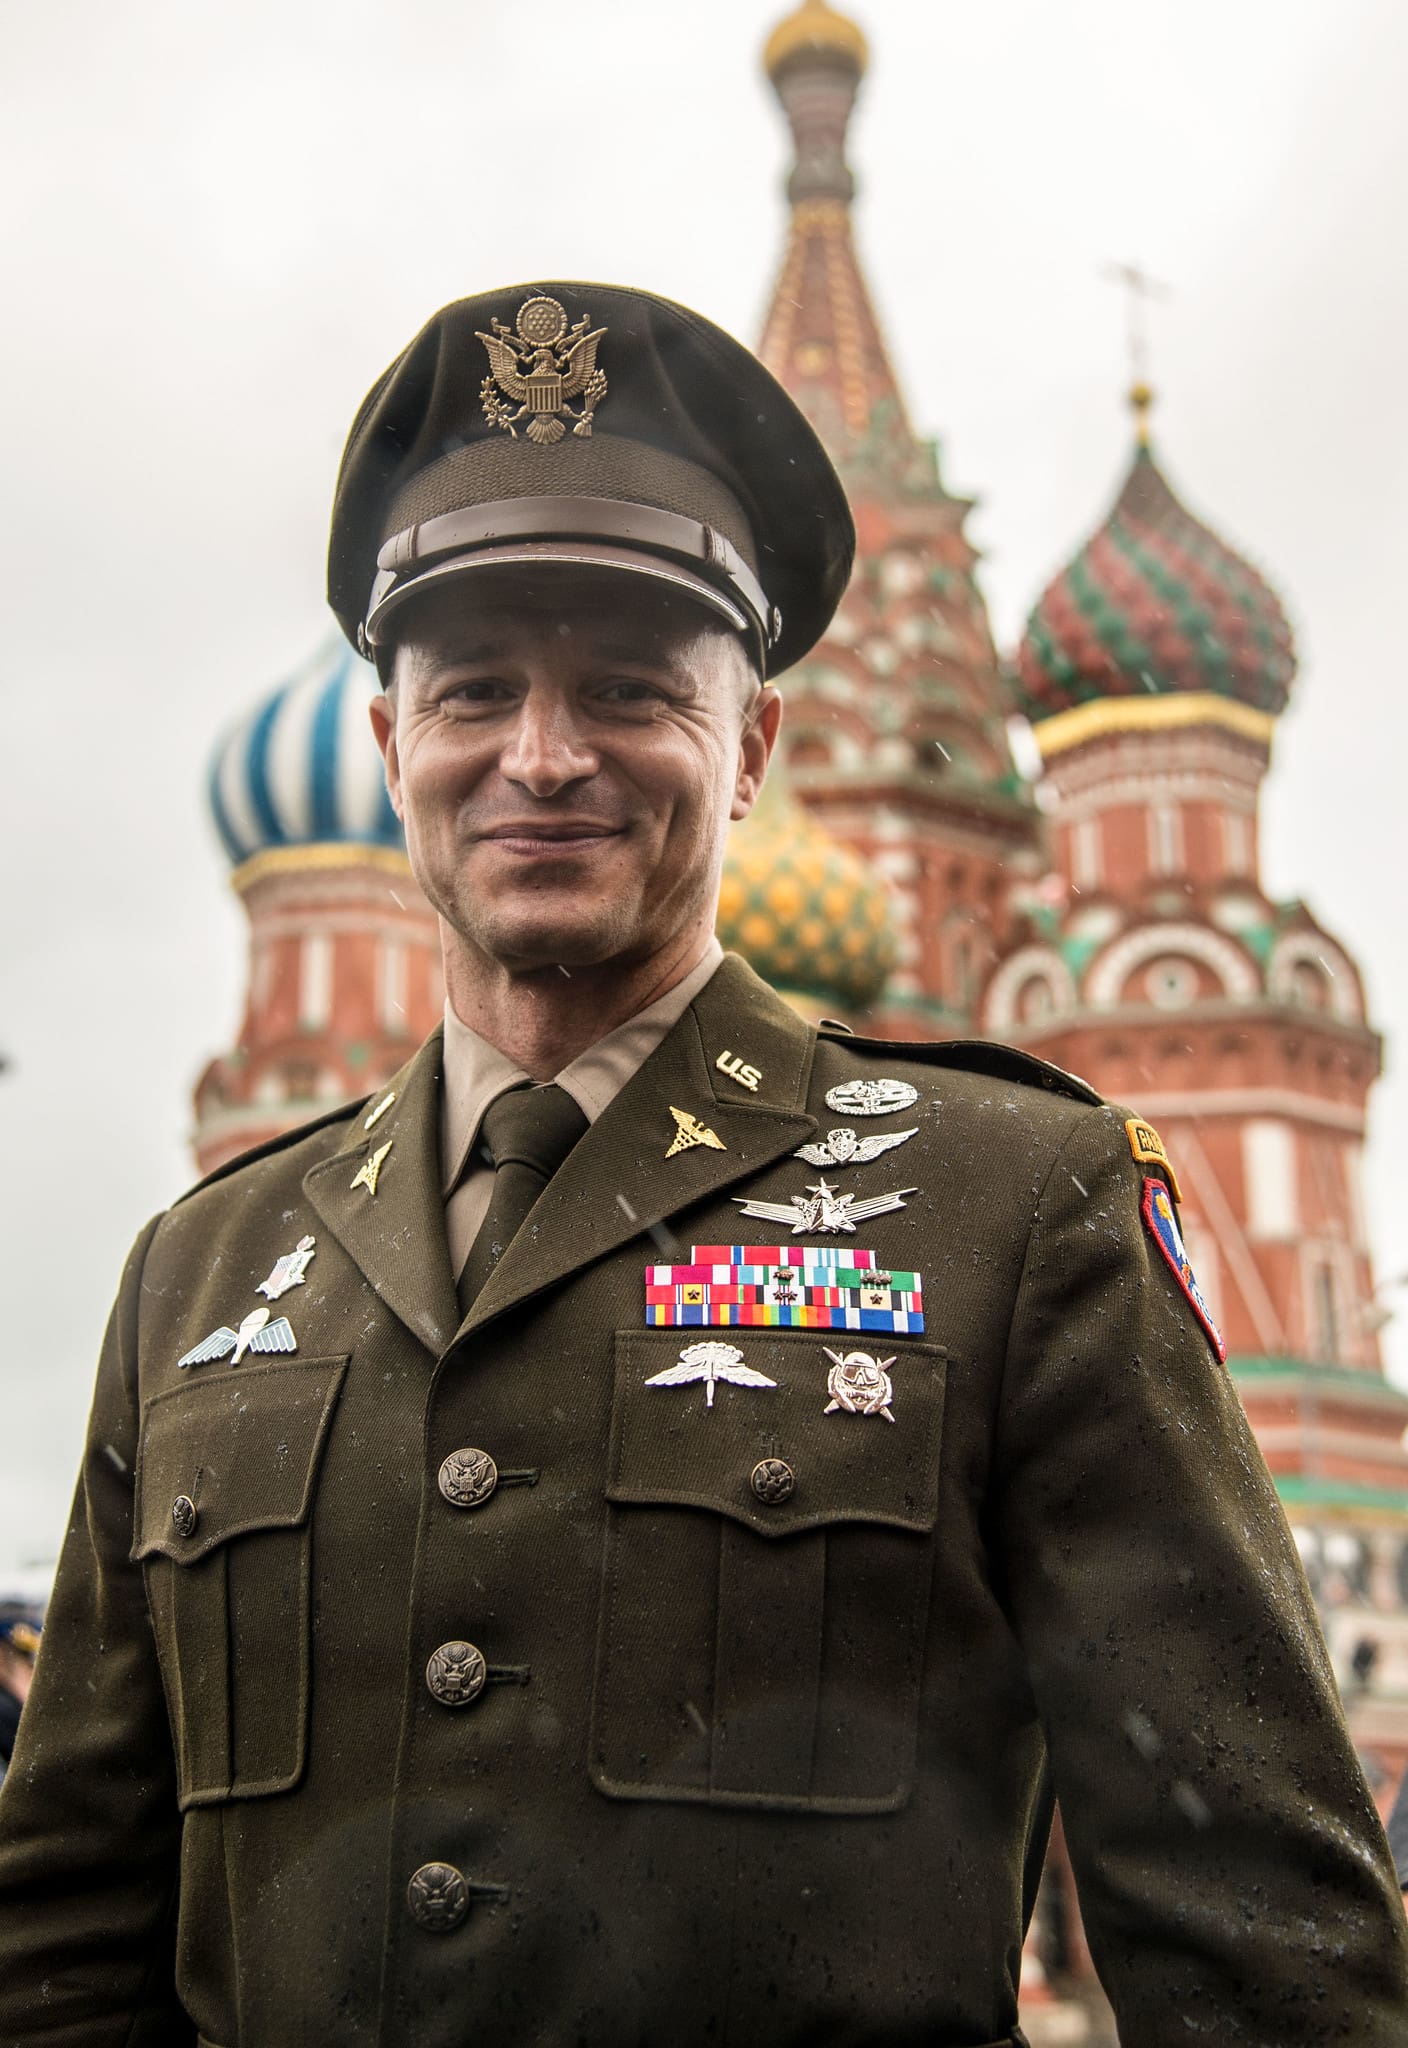  New  Army  Green Service Uniform Sighted At The Kremlin 